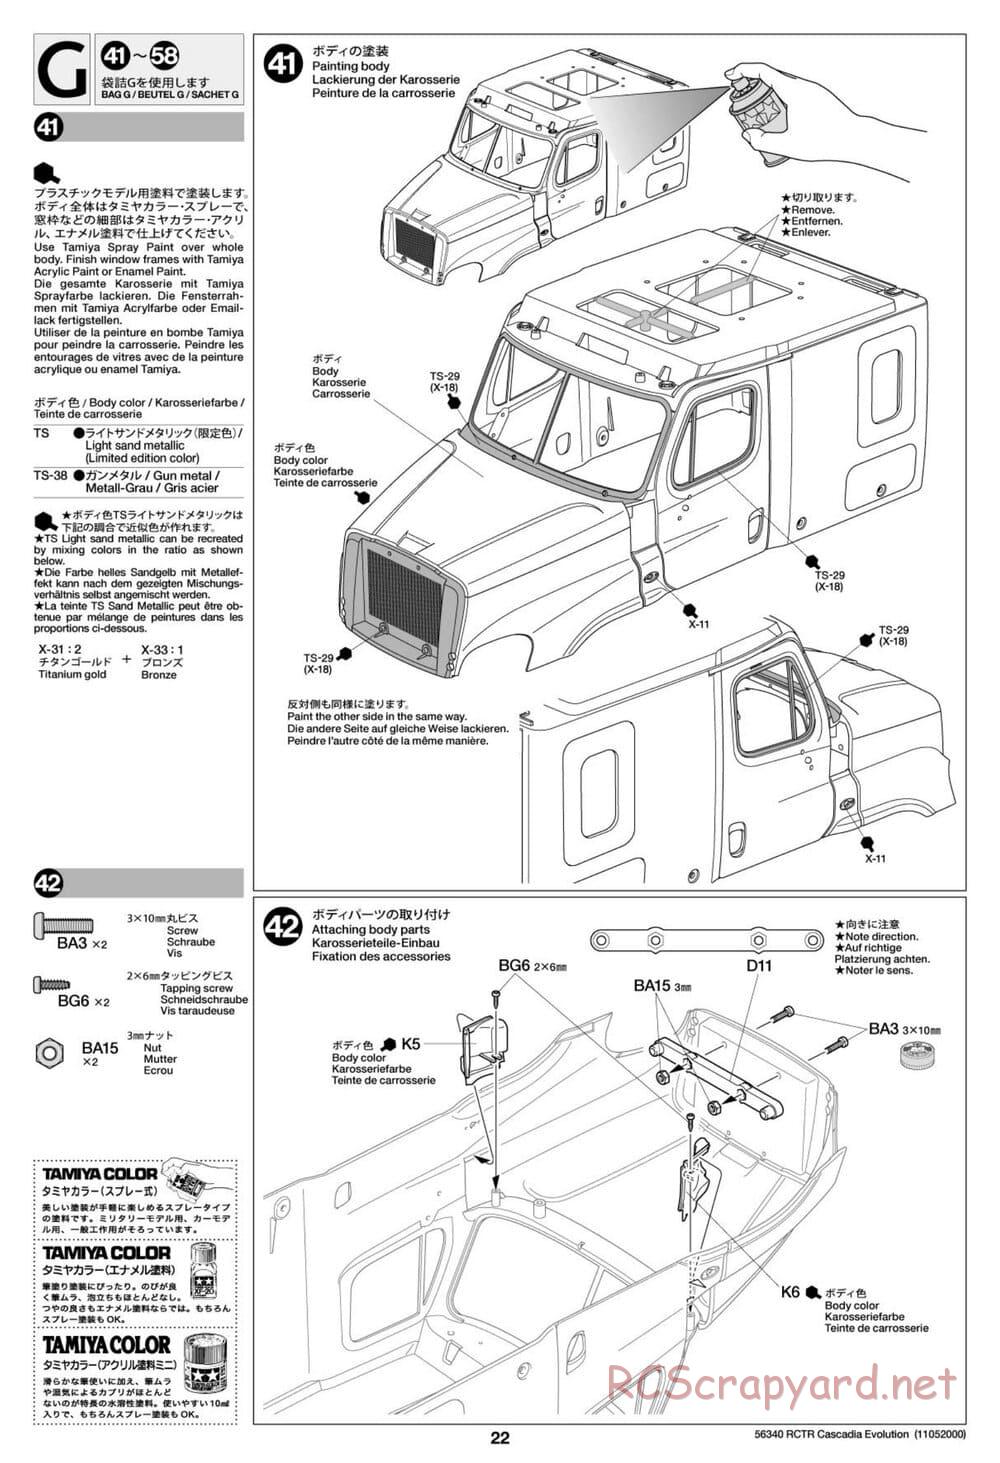 Tamiya - Freightliner Cascadia Evolution Tractor Truck Chassis - Manual - Page 22